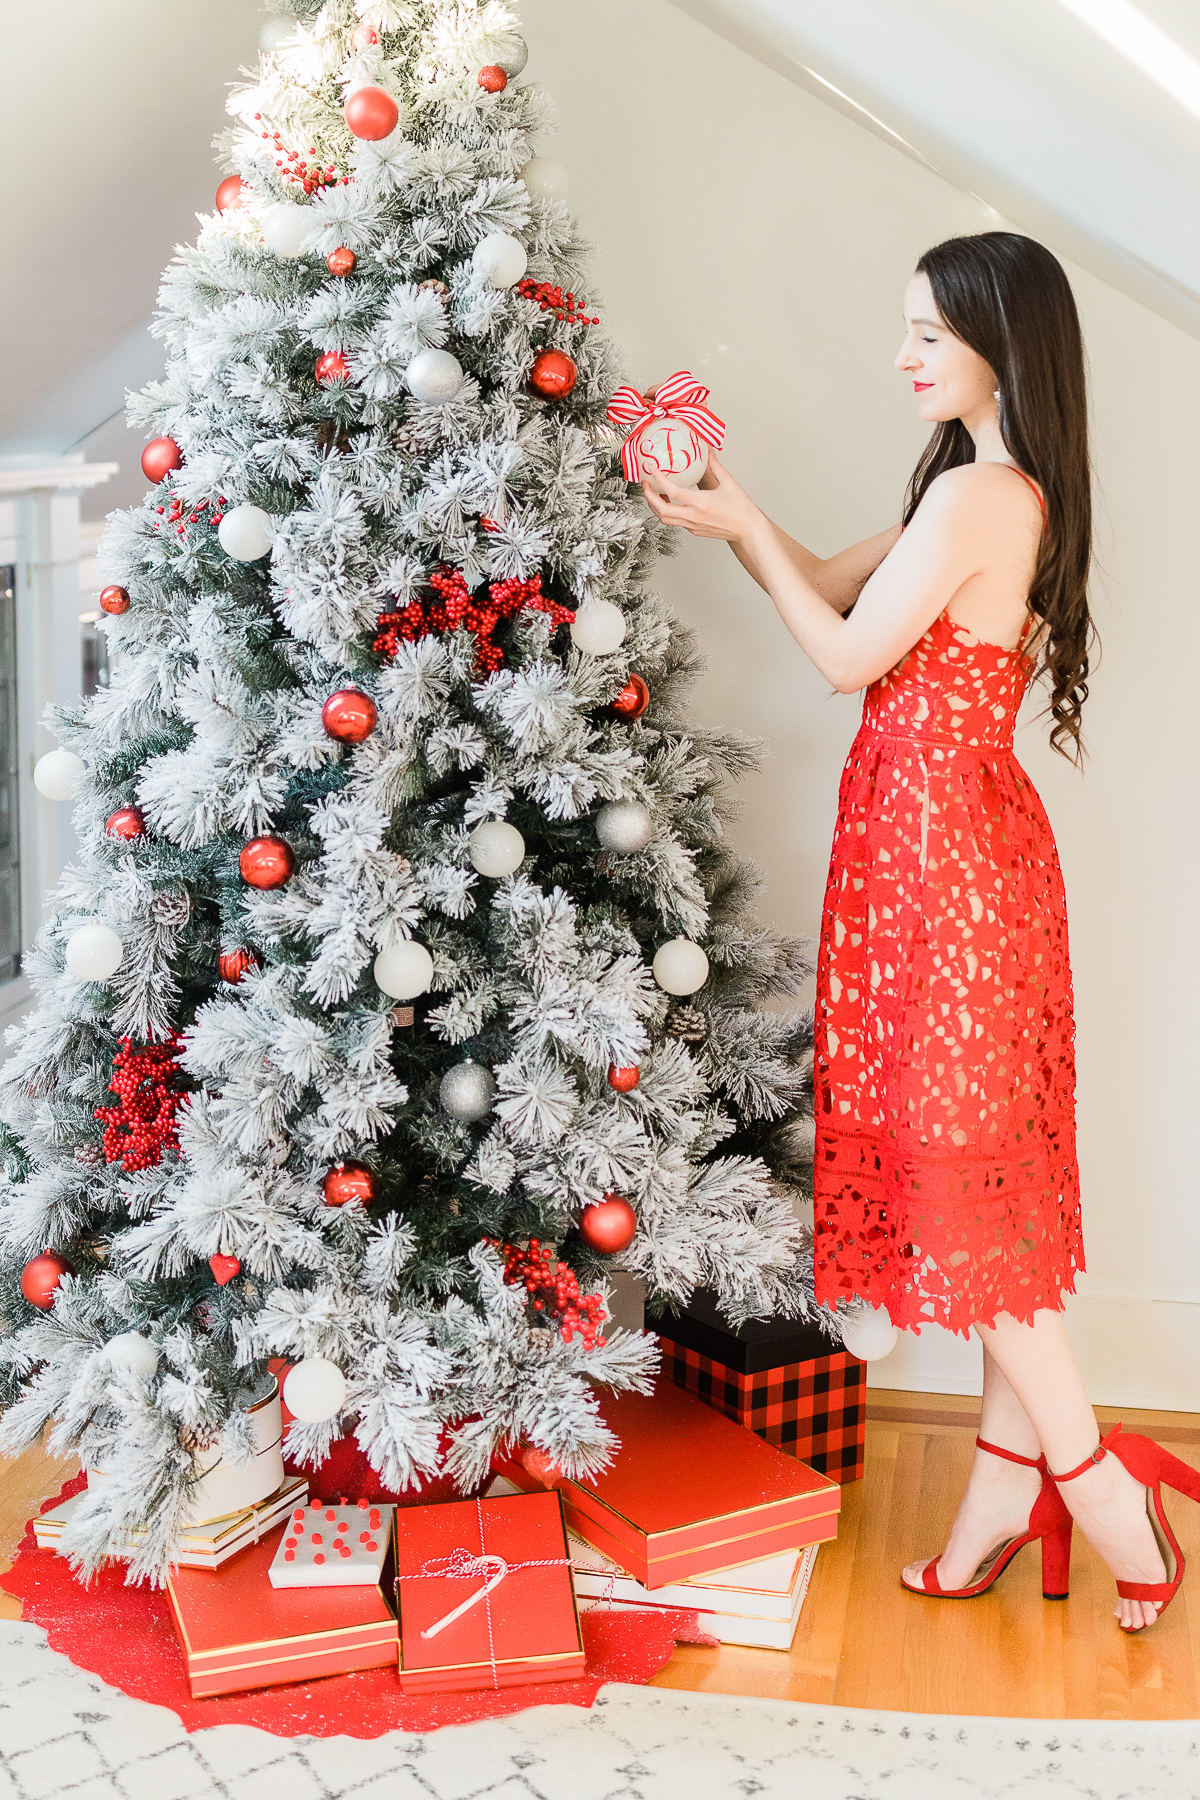 Red and white flocked Christmas tree designed by blogger Stephanie Ziajka on Diary of a Debutante